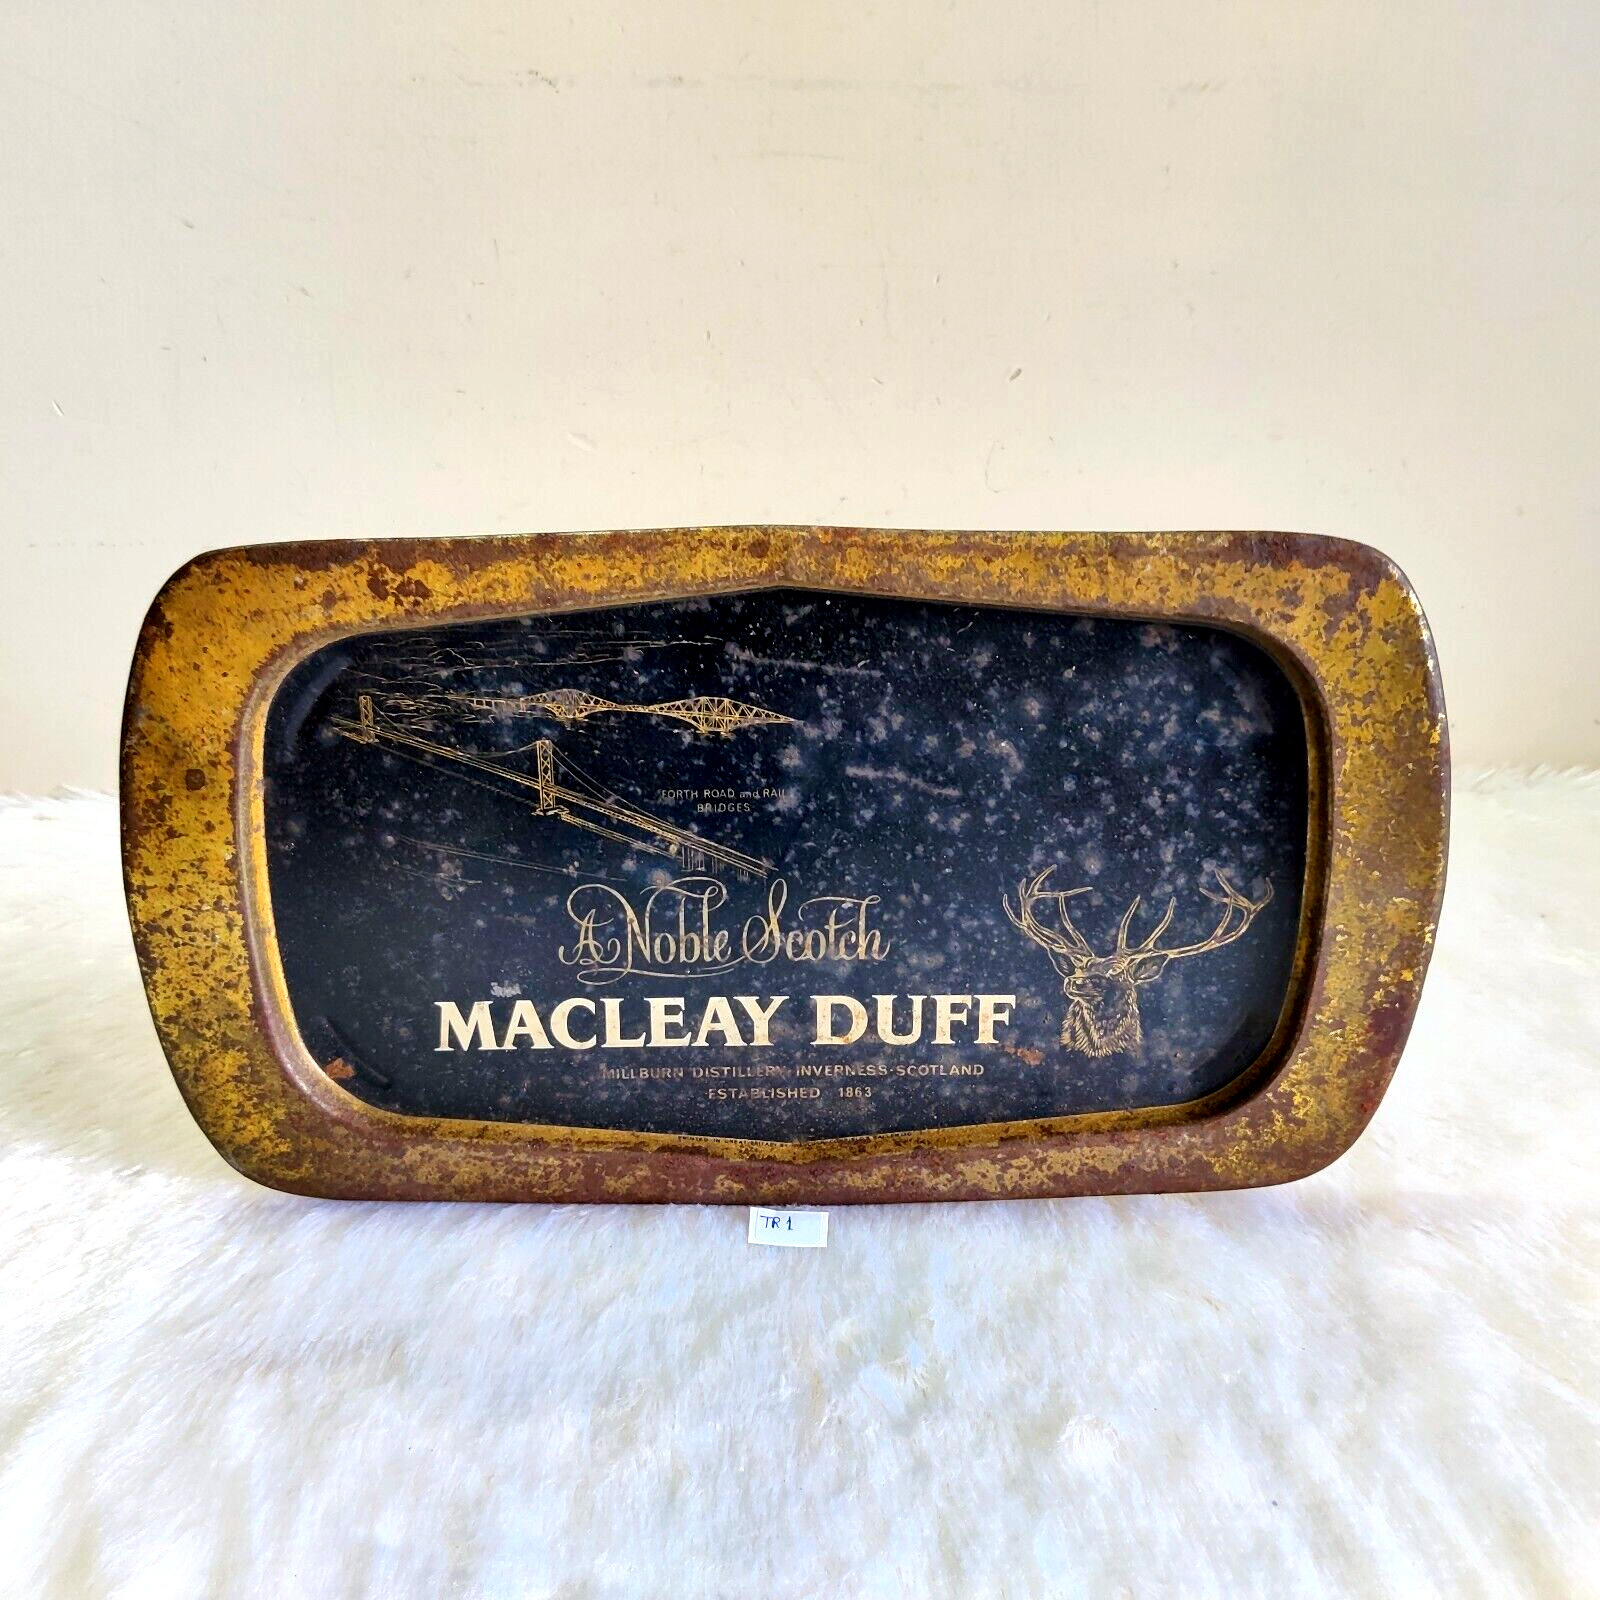 Vintage Macleady Duff Scotch Advertising Tin Tray Barware Collectible Old TR1